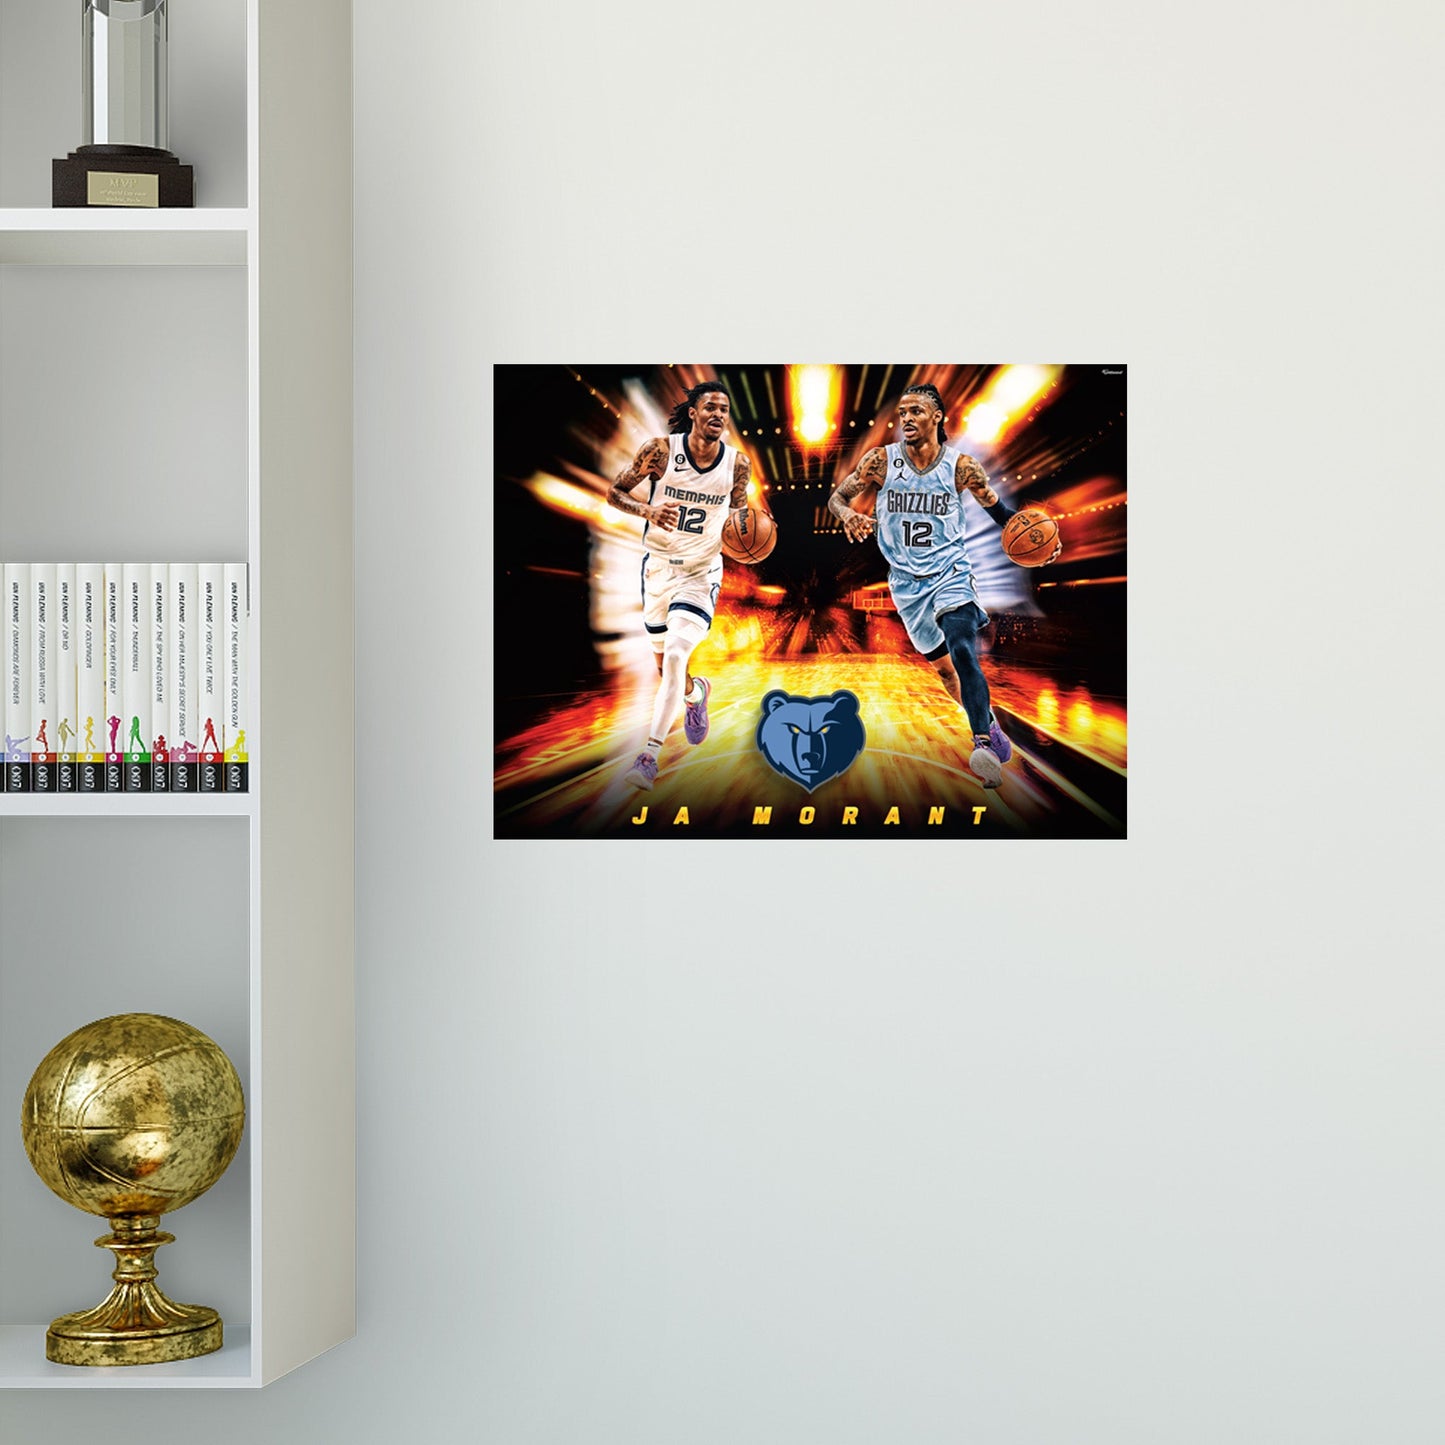 Memphis Grizzlies: Ja Morant Icon Poster - Officially Licensed NBA Removable Adhesive Decal